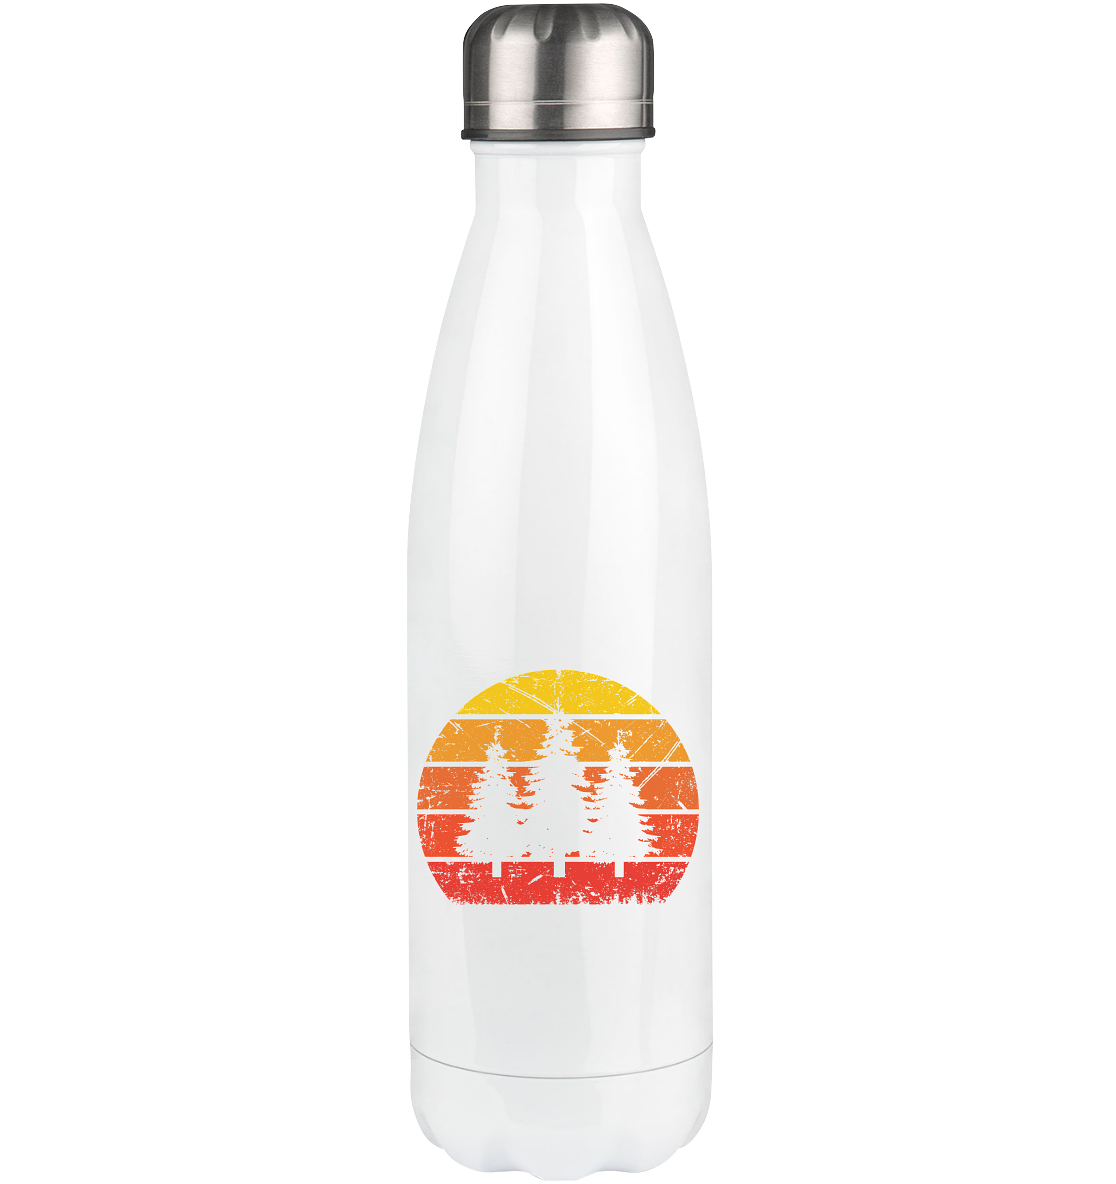 Vintage Sun and Trees - Edelstahl Thermosflasche camping UONP 500ml